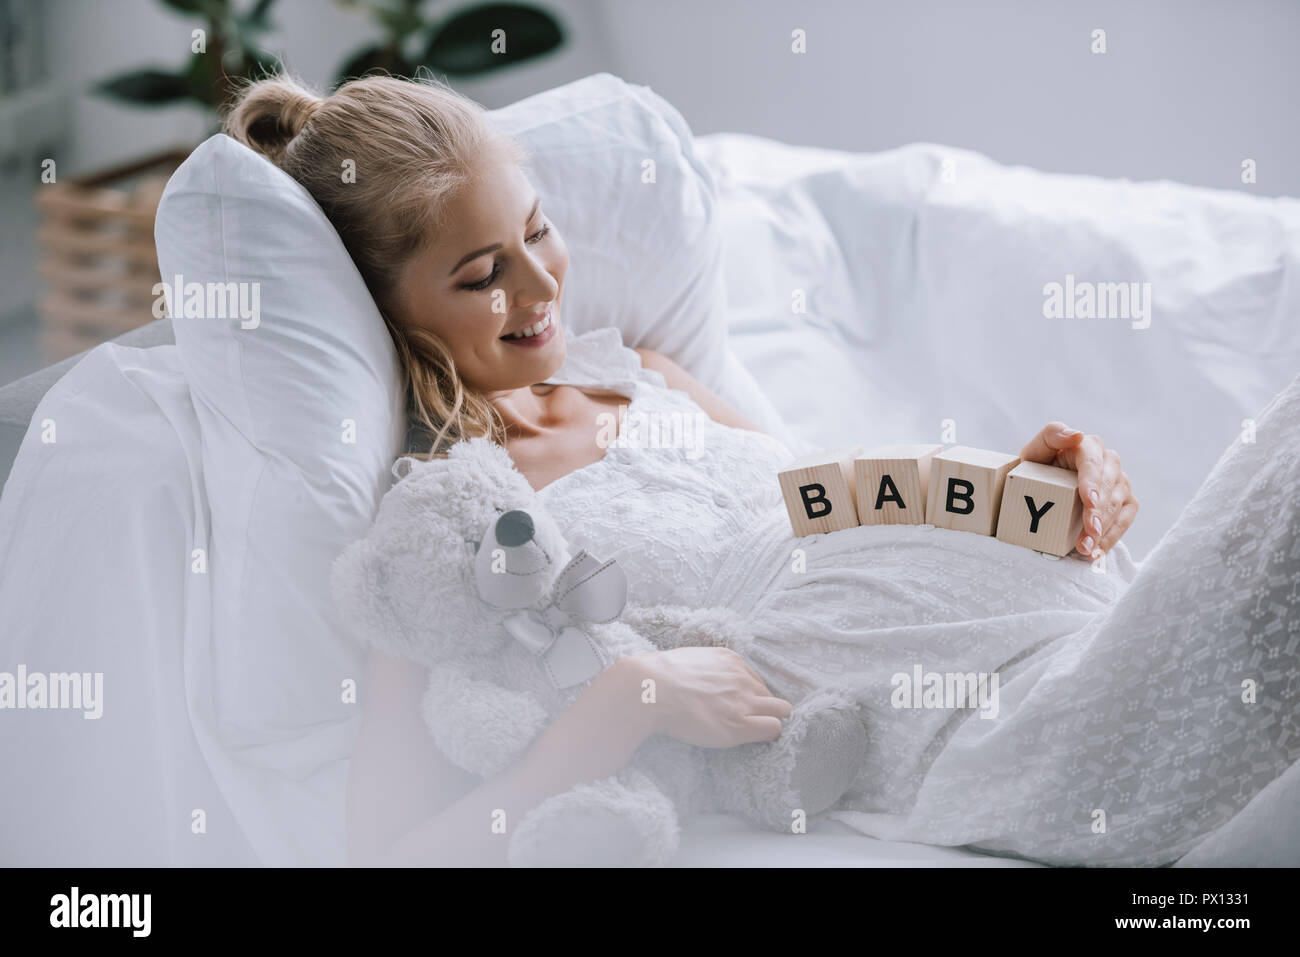 side view of smiling pregnant woman in white nightie with teddy bear and wooden blocks with baby lettering on belly resting on sofa Stock Photo